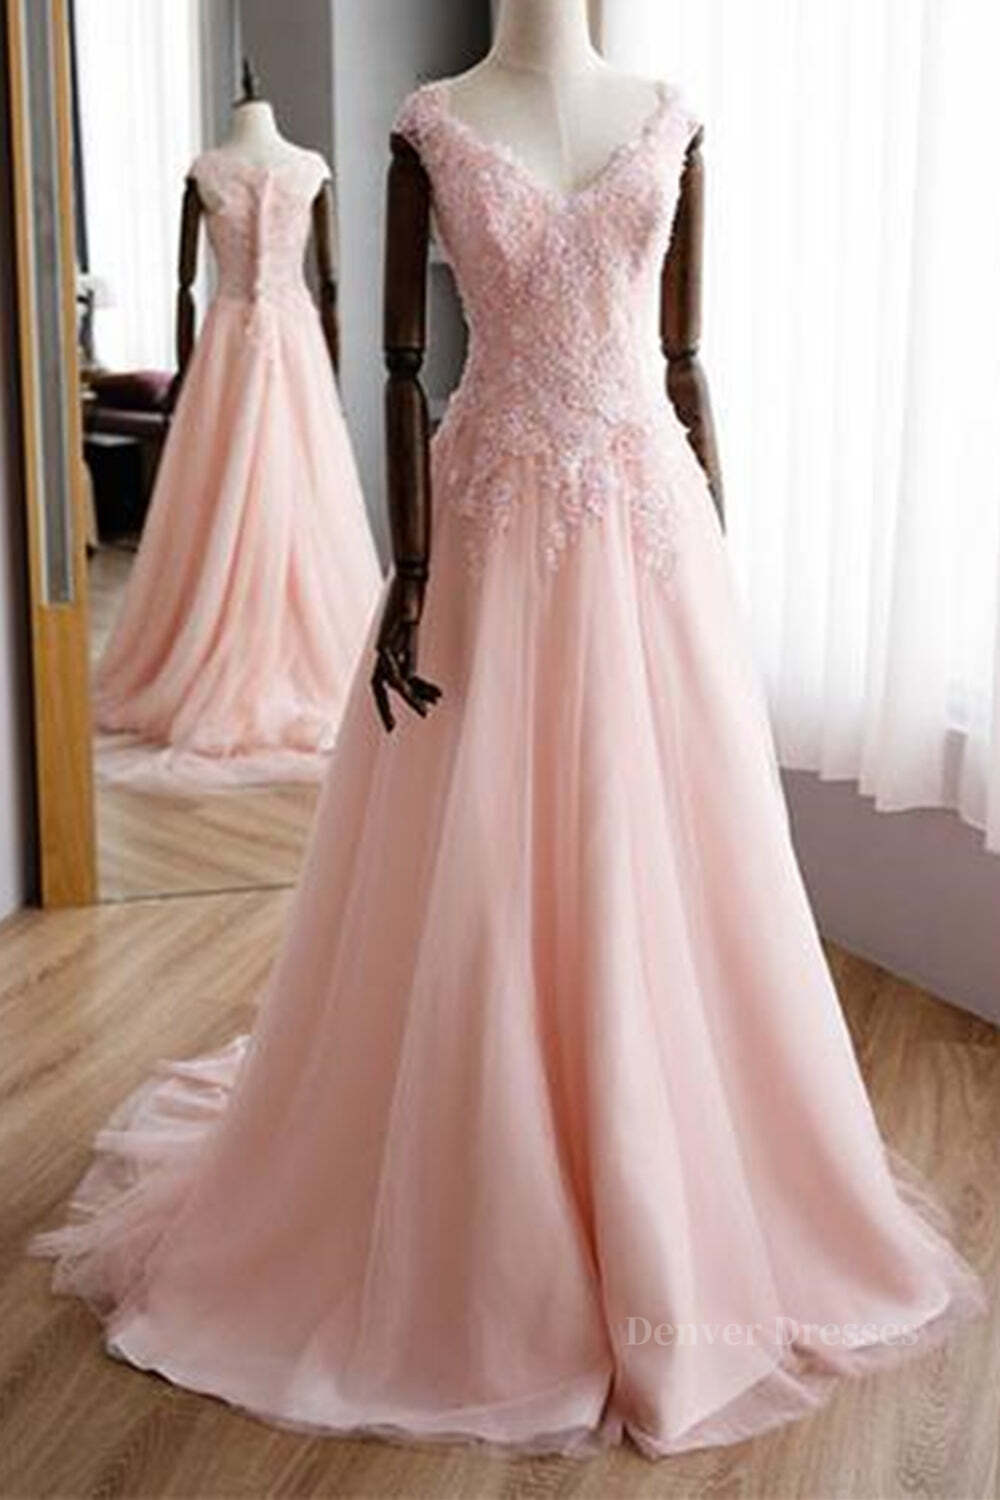 Prom Dress Long Ball Gown, A Line V Neck Pink Lace Long Prom Dresses, Pink Lace Formal Graduation Evening Dresses